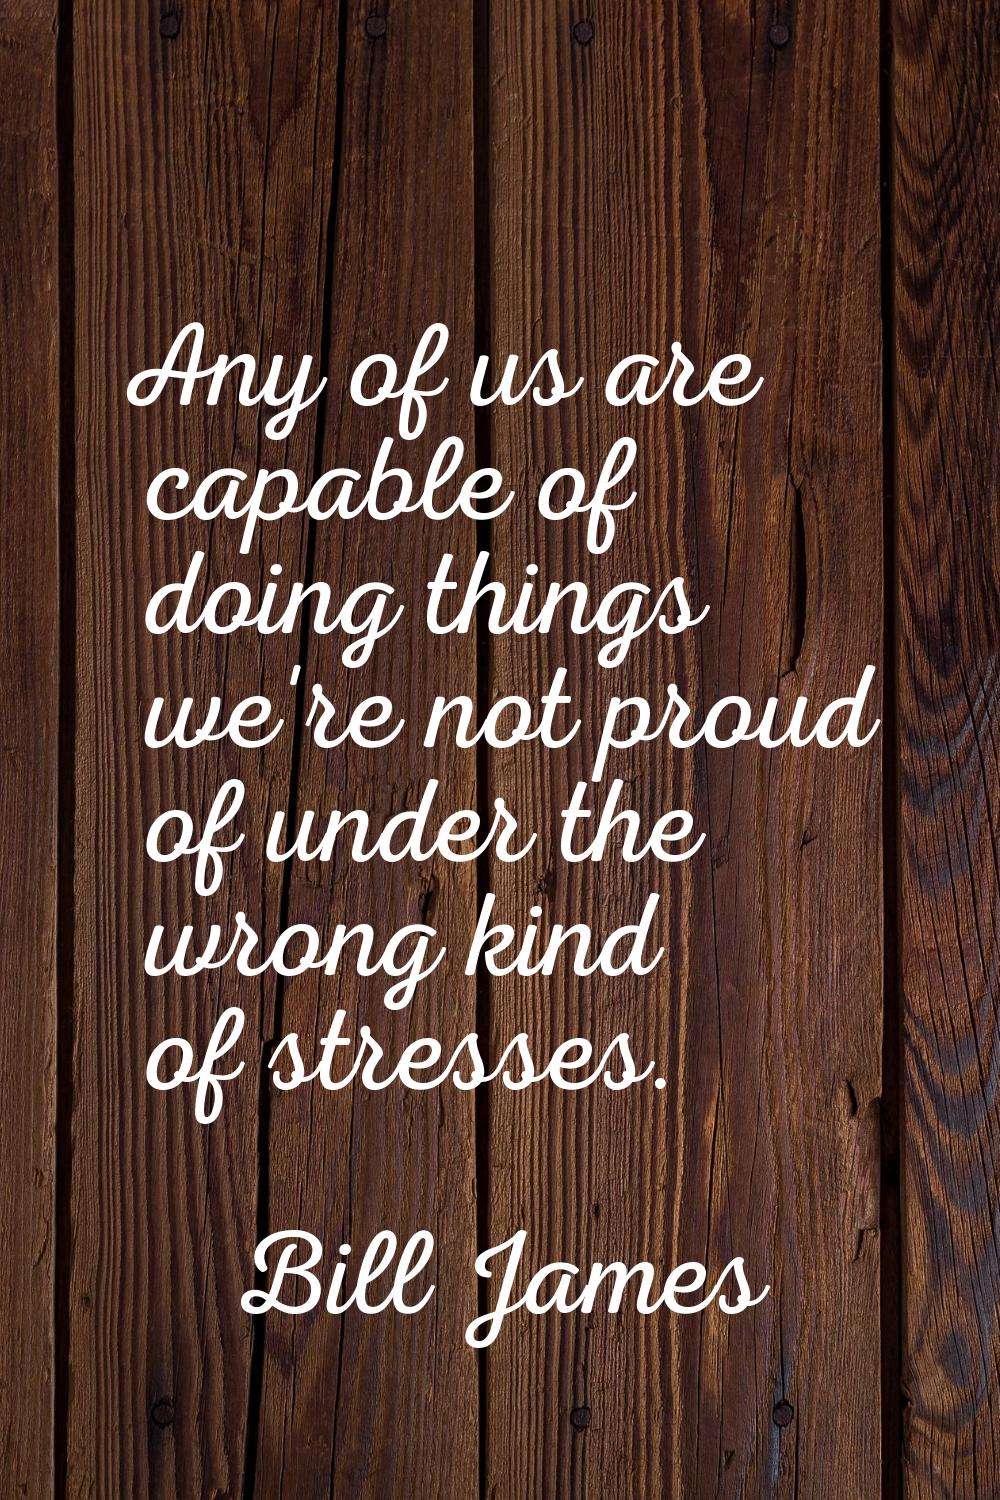 Any of us are capable of doing things we're not proud of under the wrong kind of stresses.